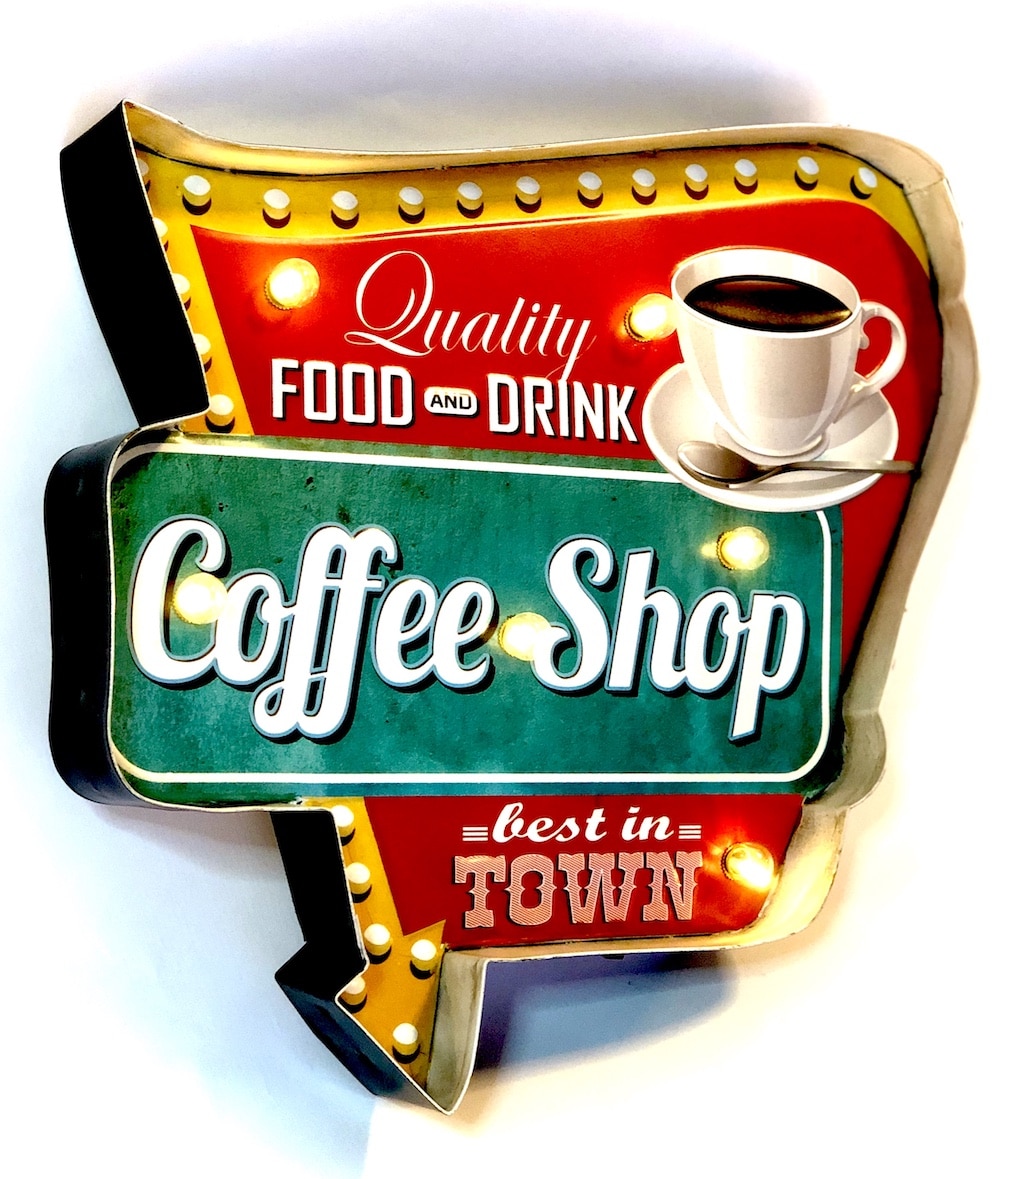 vintage-coffee-sign-for-coffee-shop-quality-food-and-drink-coffee